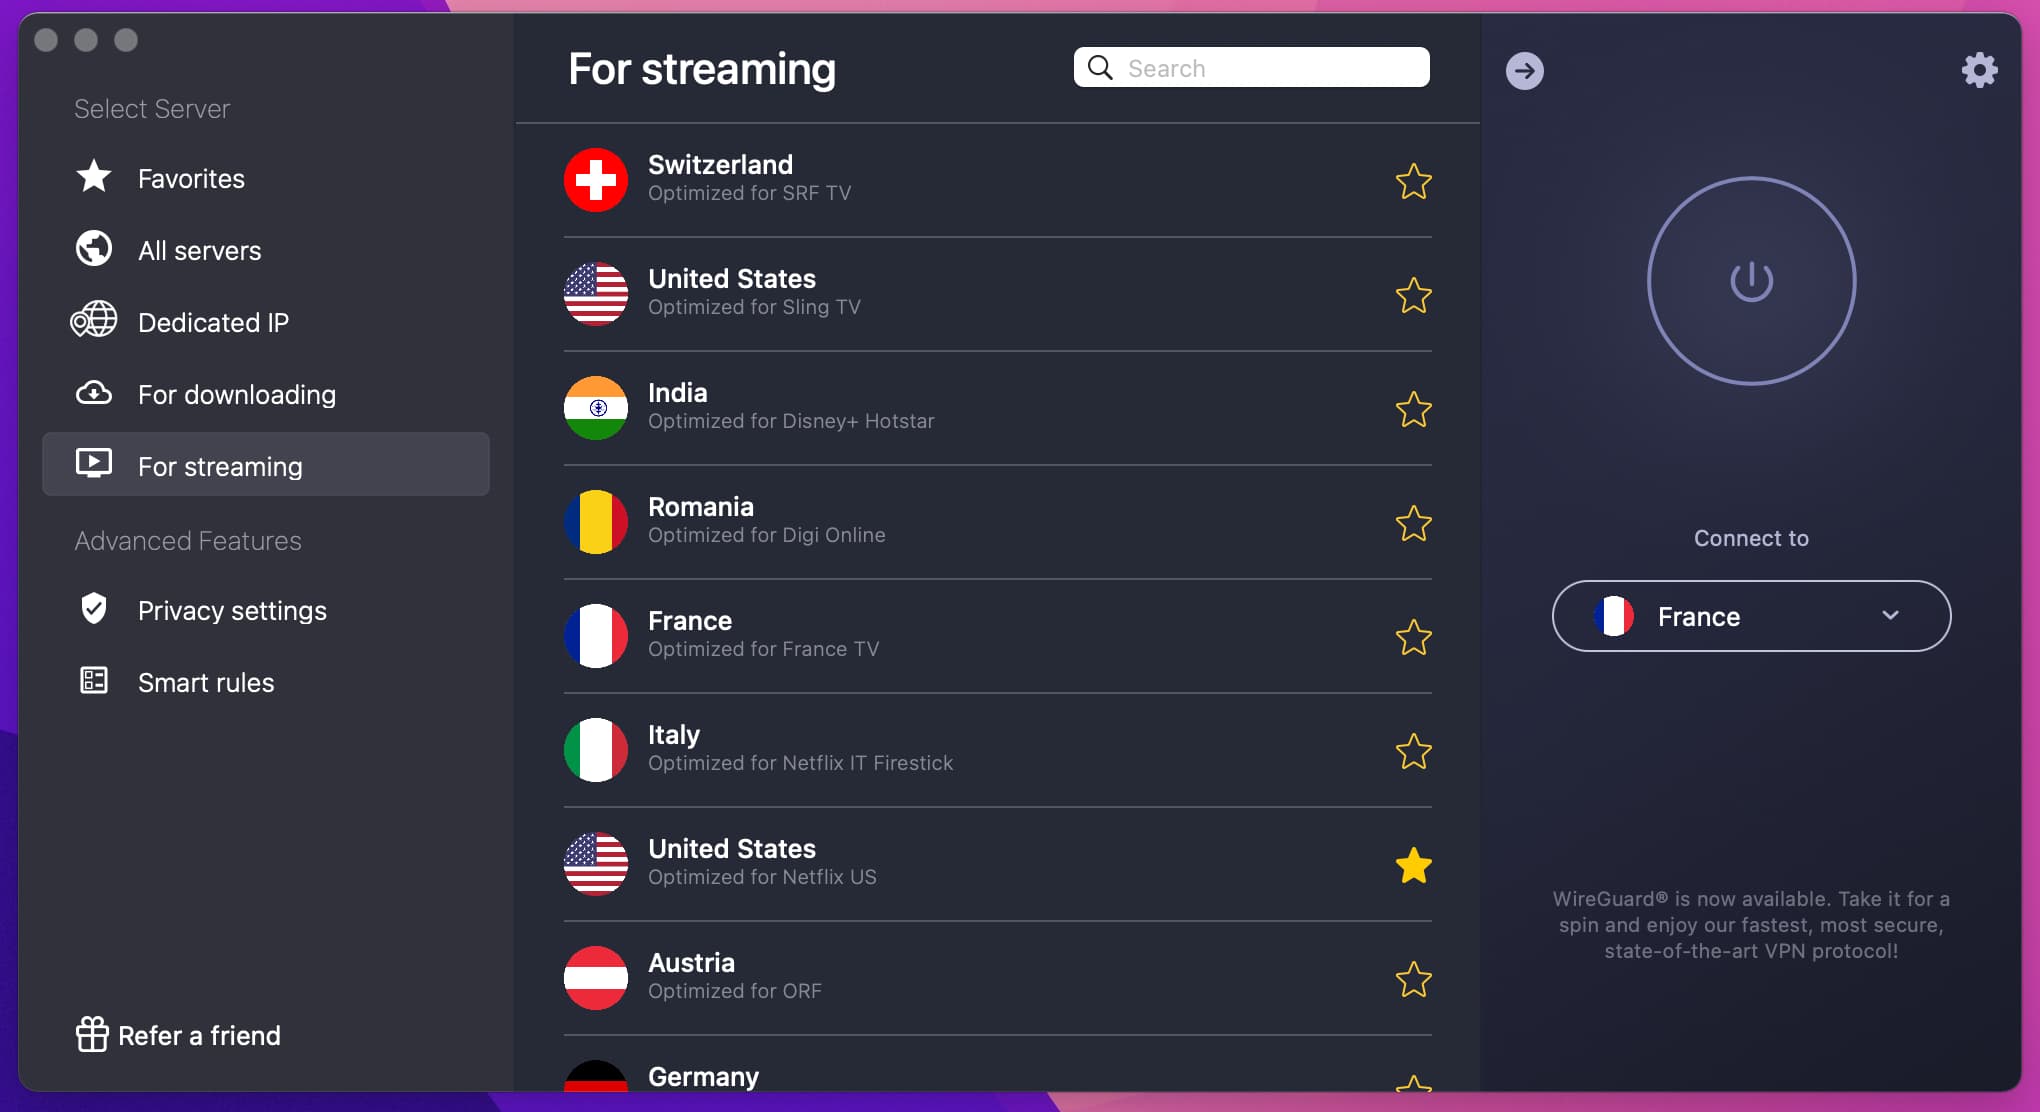 List of foreign connections optimized for streaming